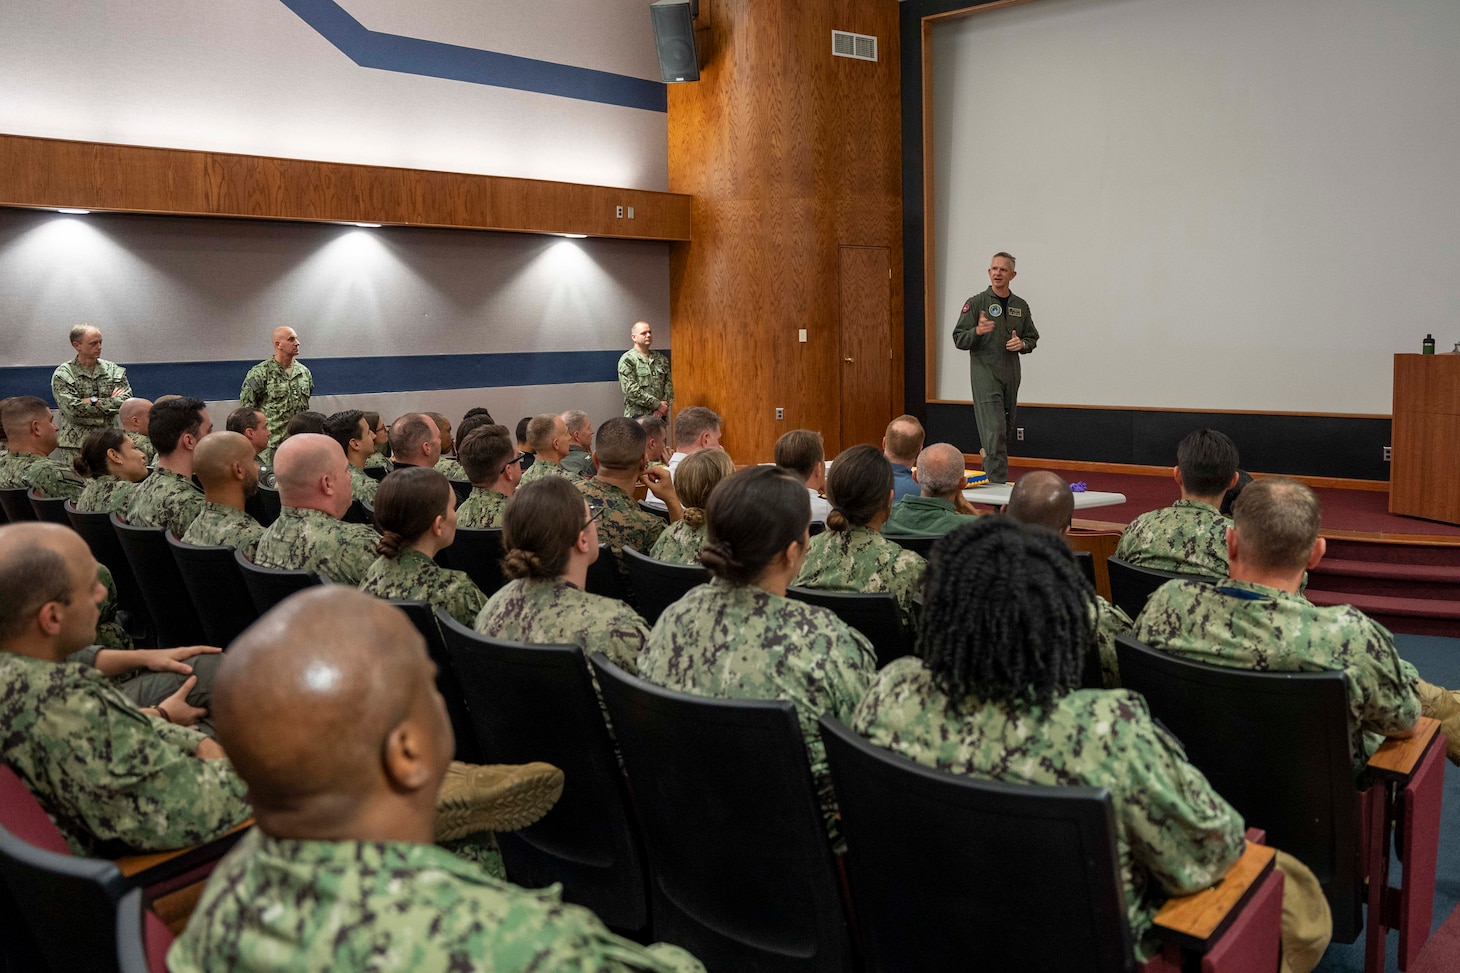 NORFOLK, Va. - Vice Adm. Daniel Dwyer, commander, U.S. 2nd Fleet, speaks to U.S. 2nd Fleet staff members during a five-year anniversary celebration for U.S. 2nd Fleet, Aug. 17, 2023. U.S. 2nd Fleet employs maritime forces ready to fight across multiple domains in the Atlantic and Arctic in order to ensure access, deter aggression and defend U.S., allied, and partner interests. (U.S. Navy photo by Mass Communication Specialist 2nd Class Anderson W. Branch)